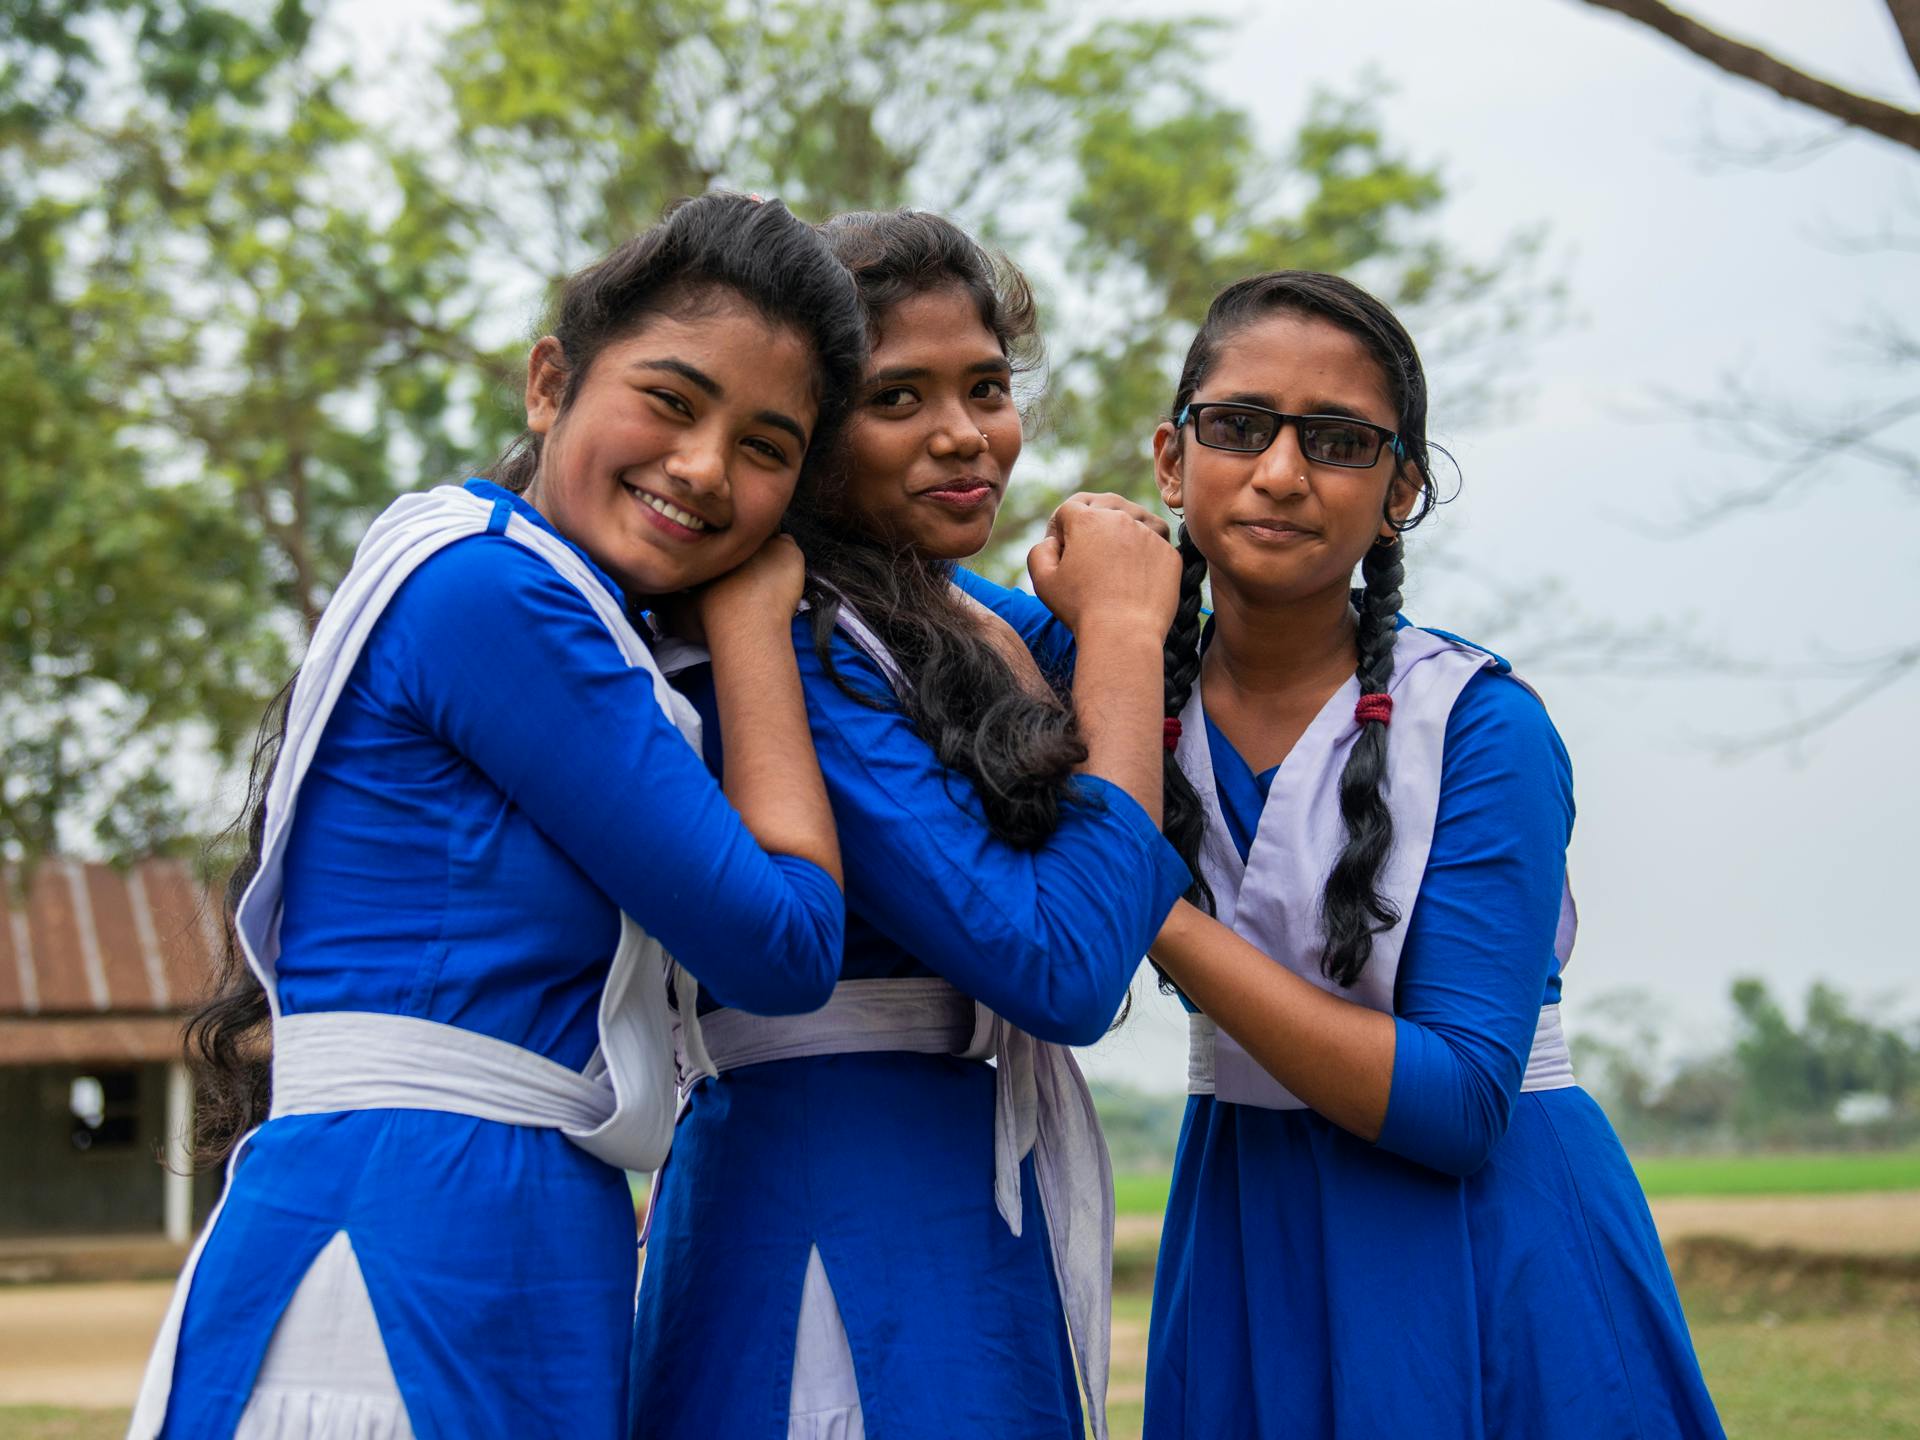 Three young women wearing blue and white school uniforms, standing together and smiling.